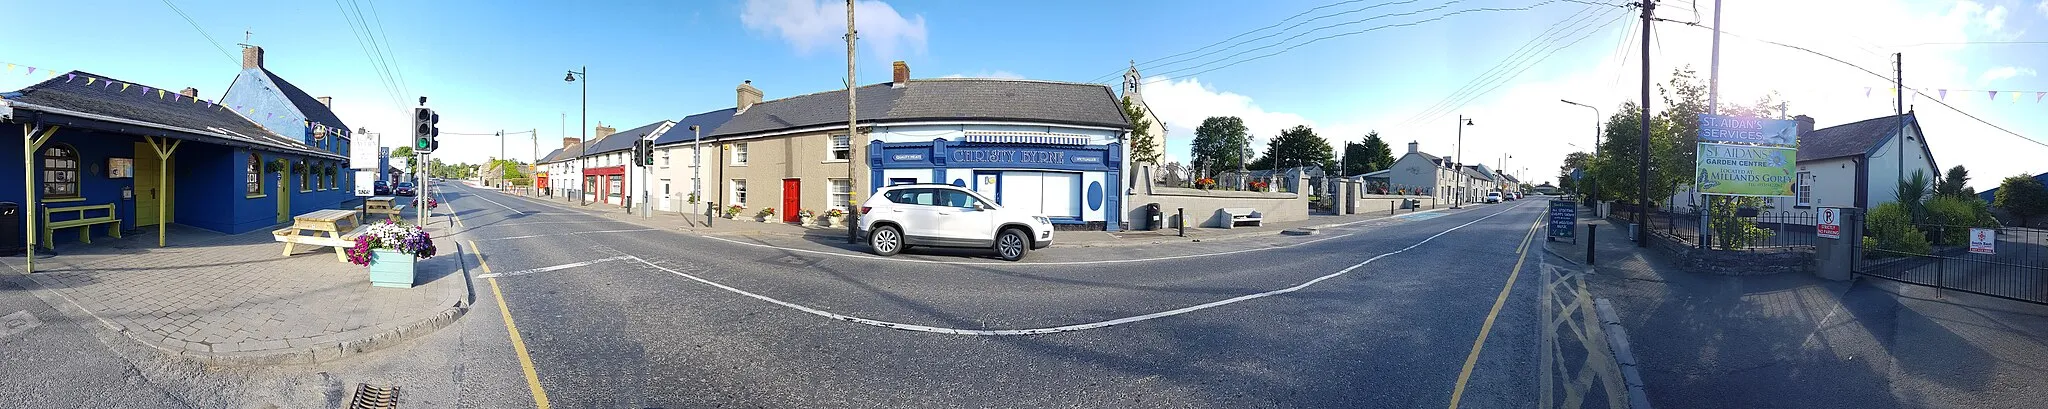 Photo showing: Main Street in Camolin, County Wexford, Ireland.